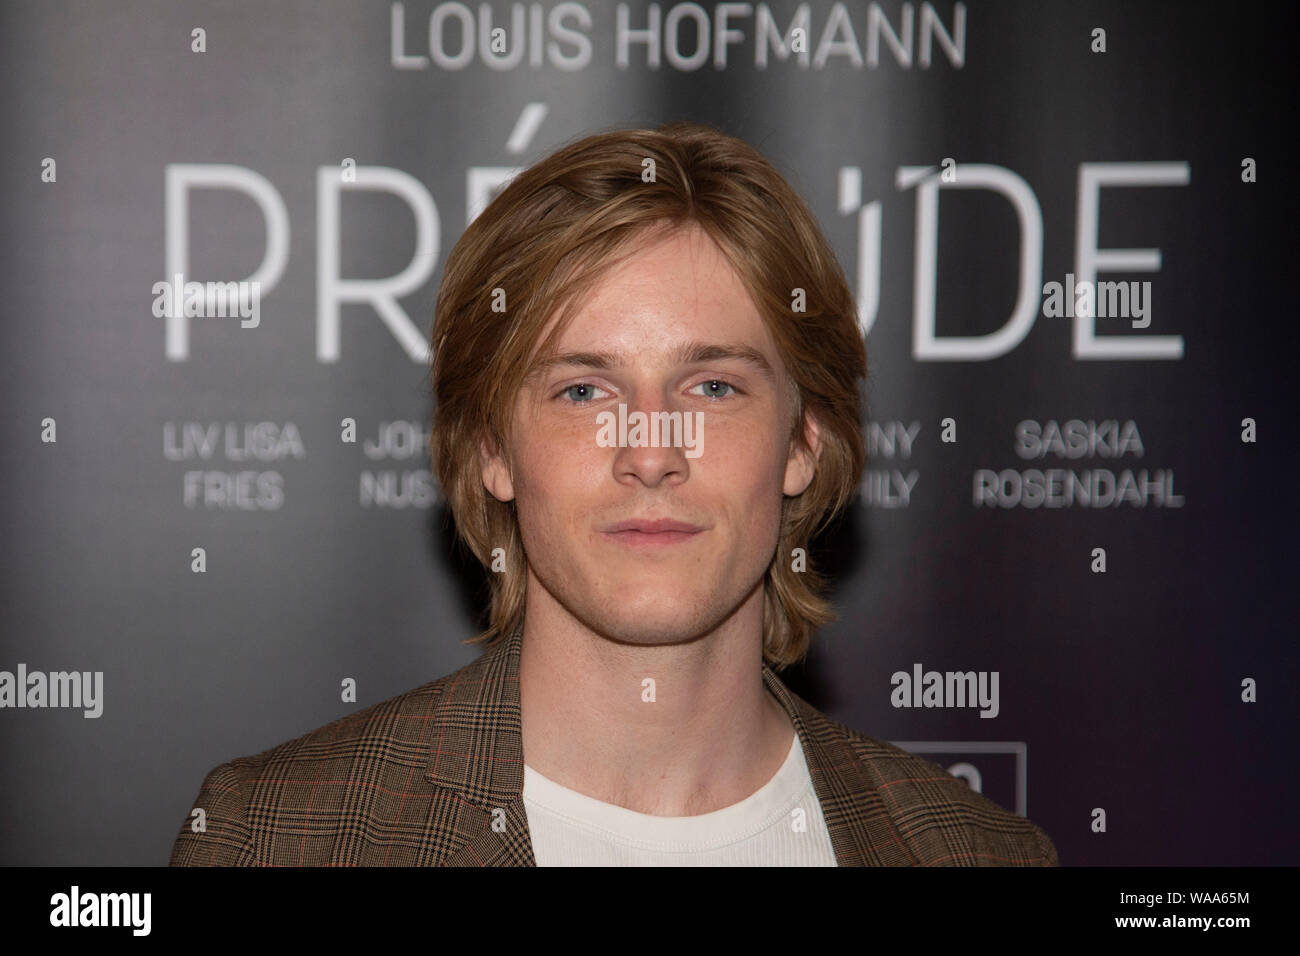 Louis Hofmann High Resolution Stock Photography and Images - Alamy